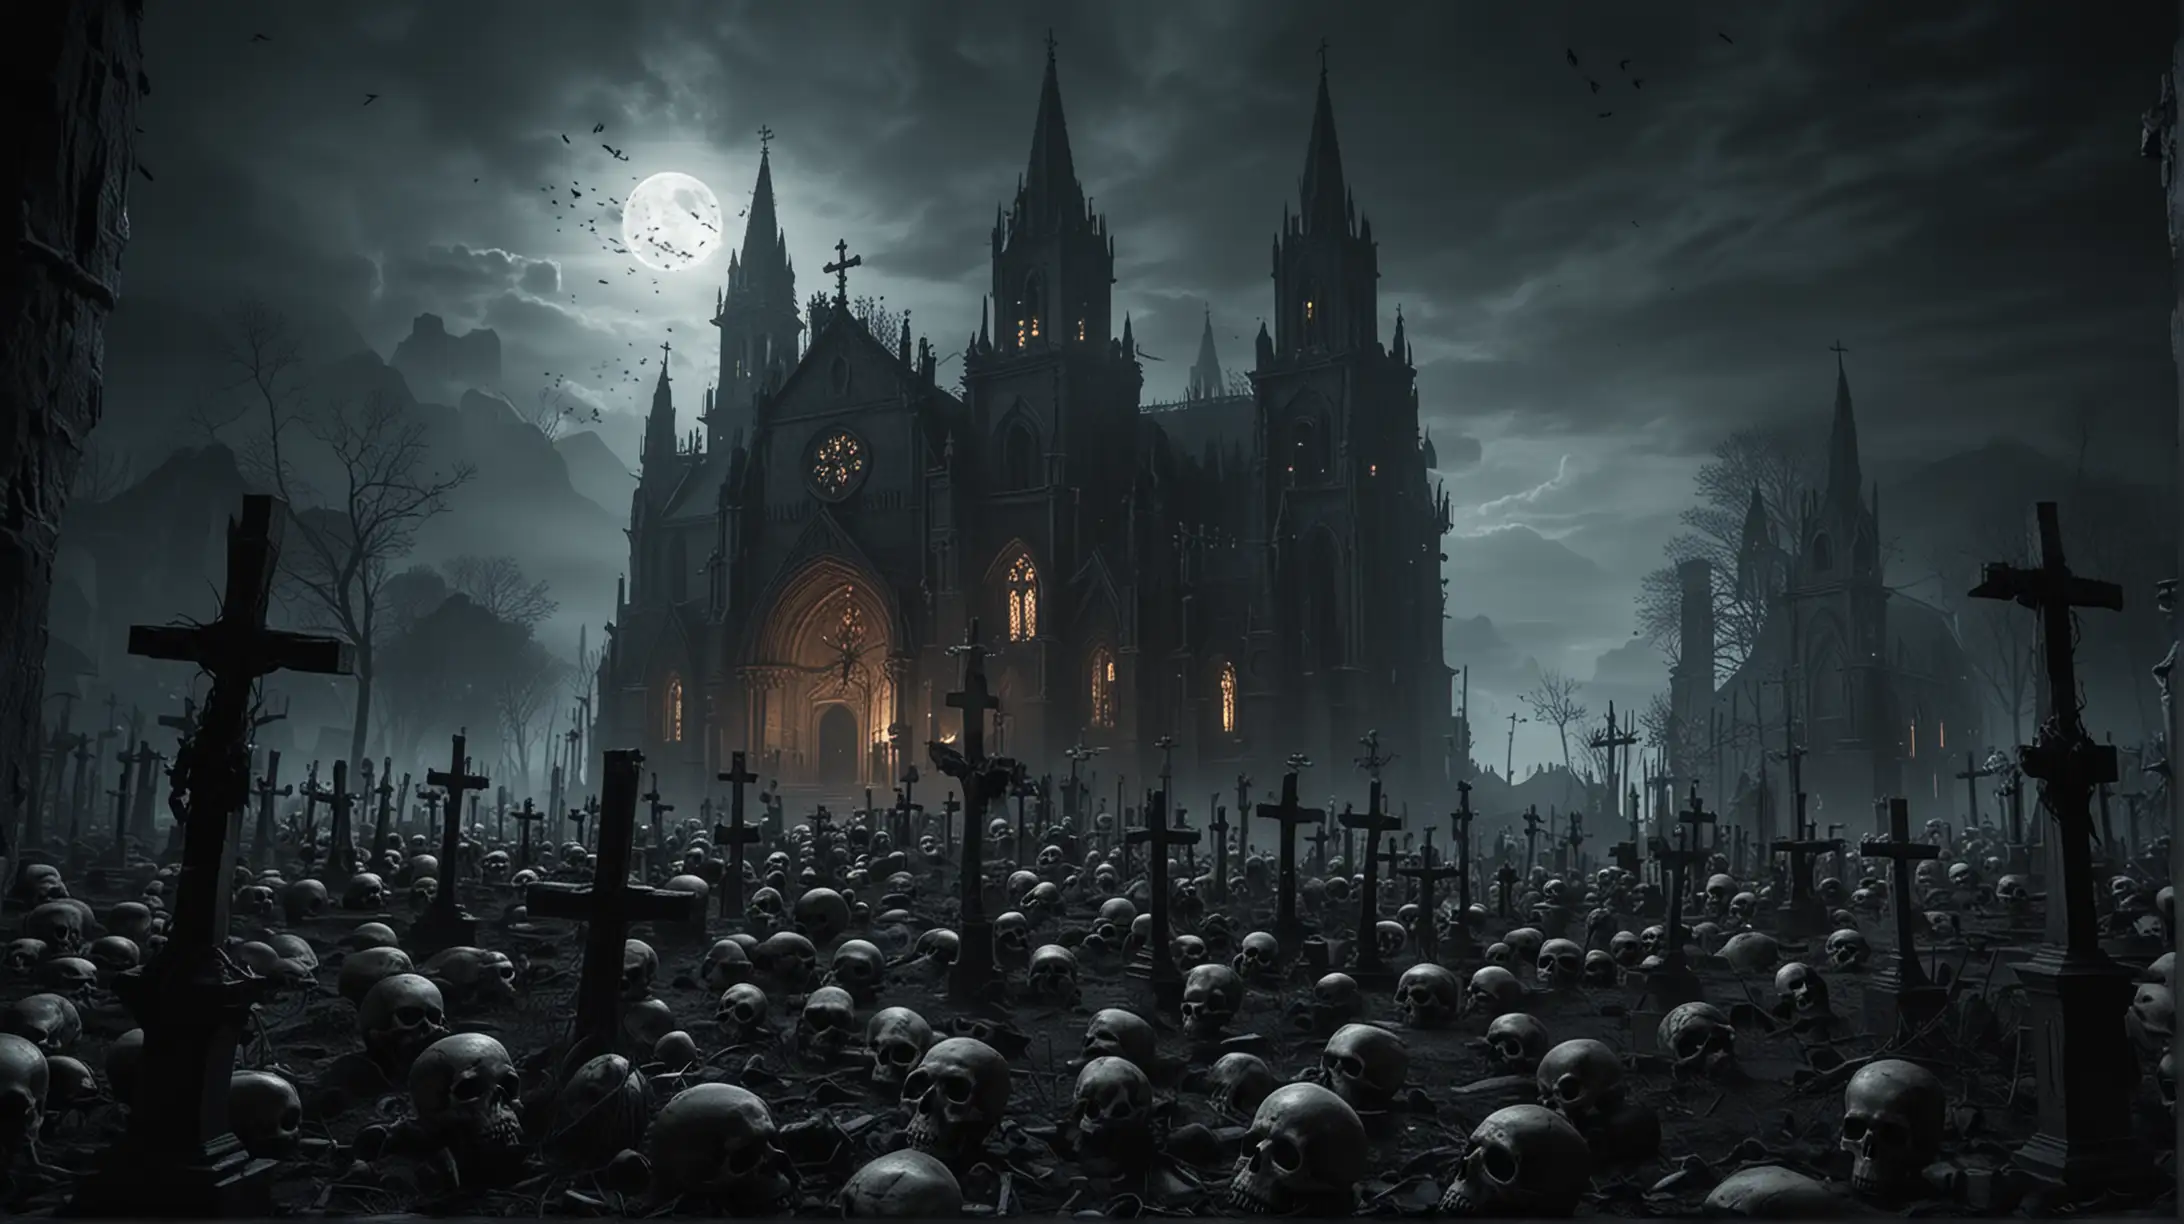 Eerie Skull Cemetery Surrounded by Foreboding Church